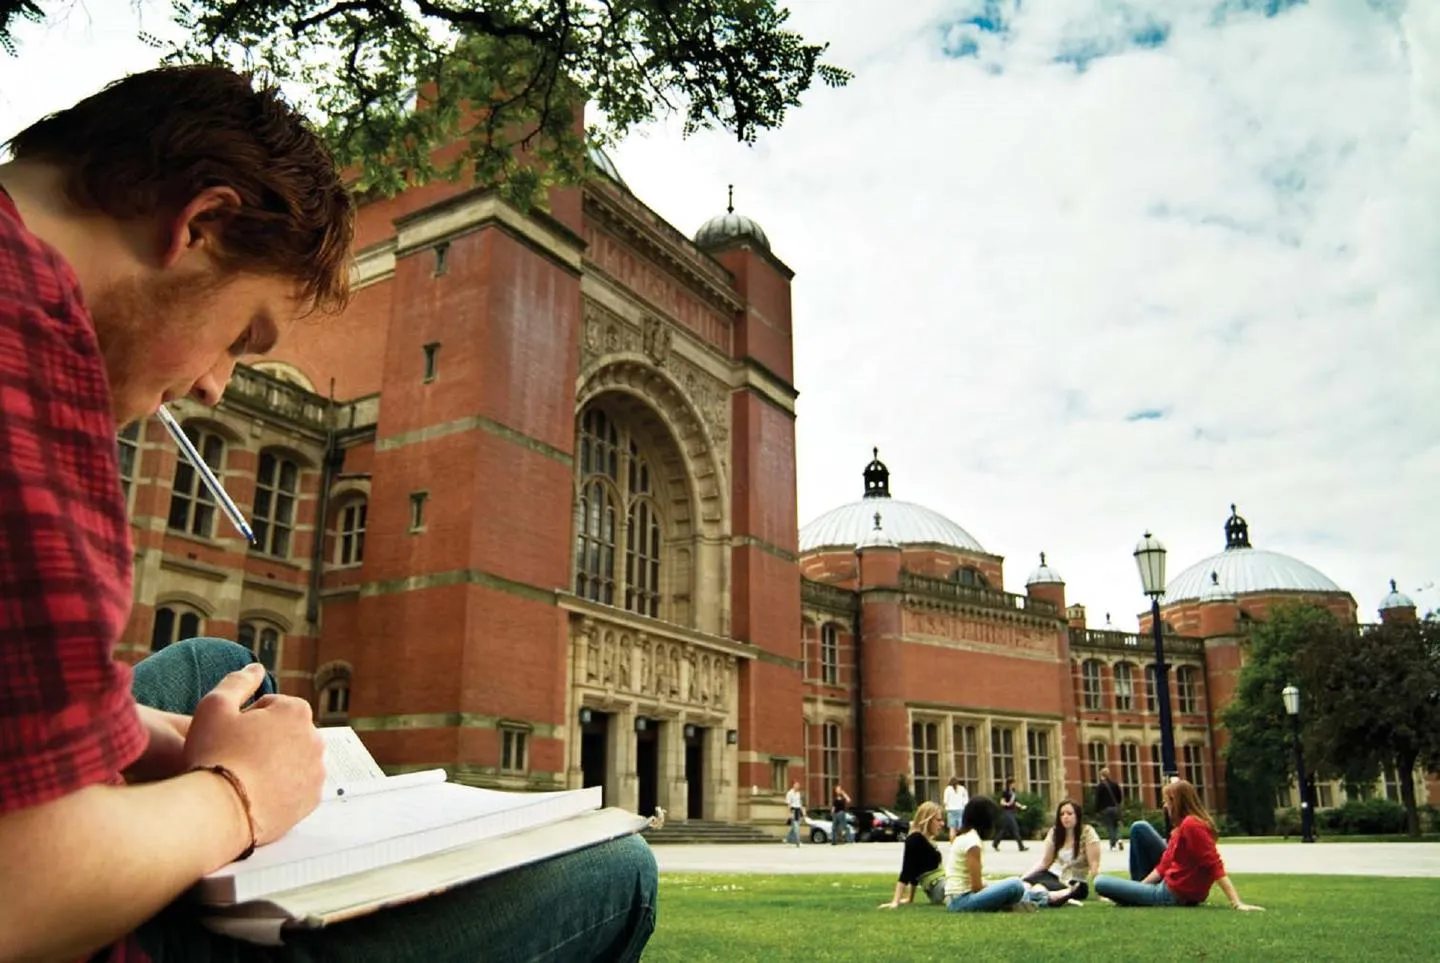 Students working outside Aston Webb building